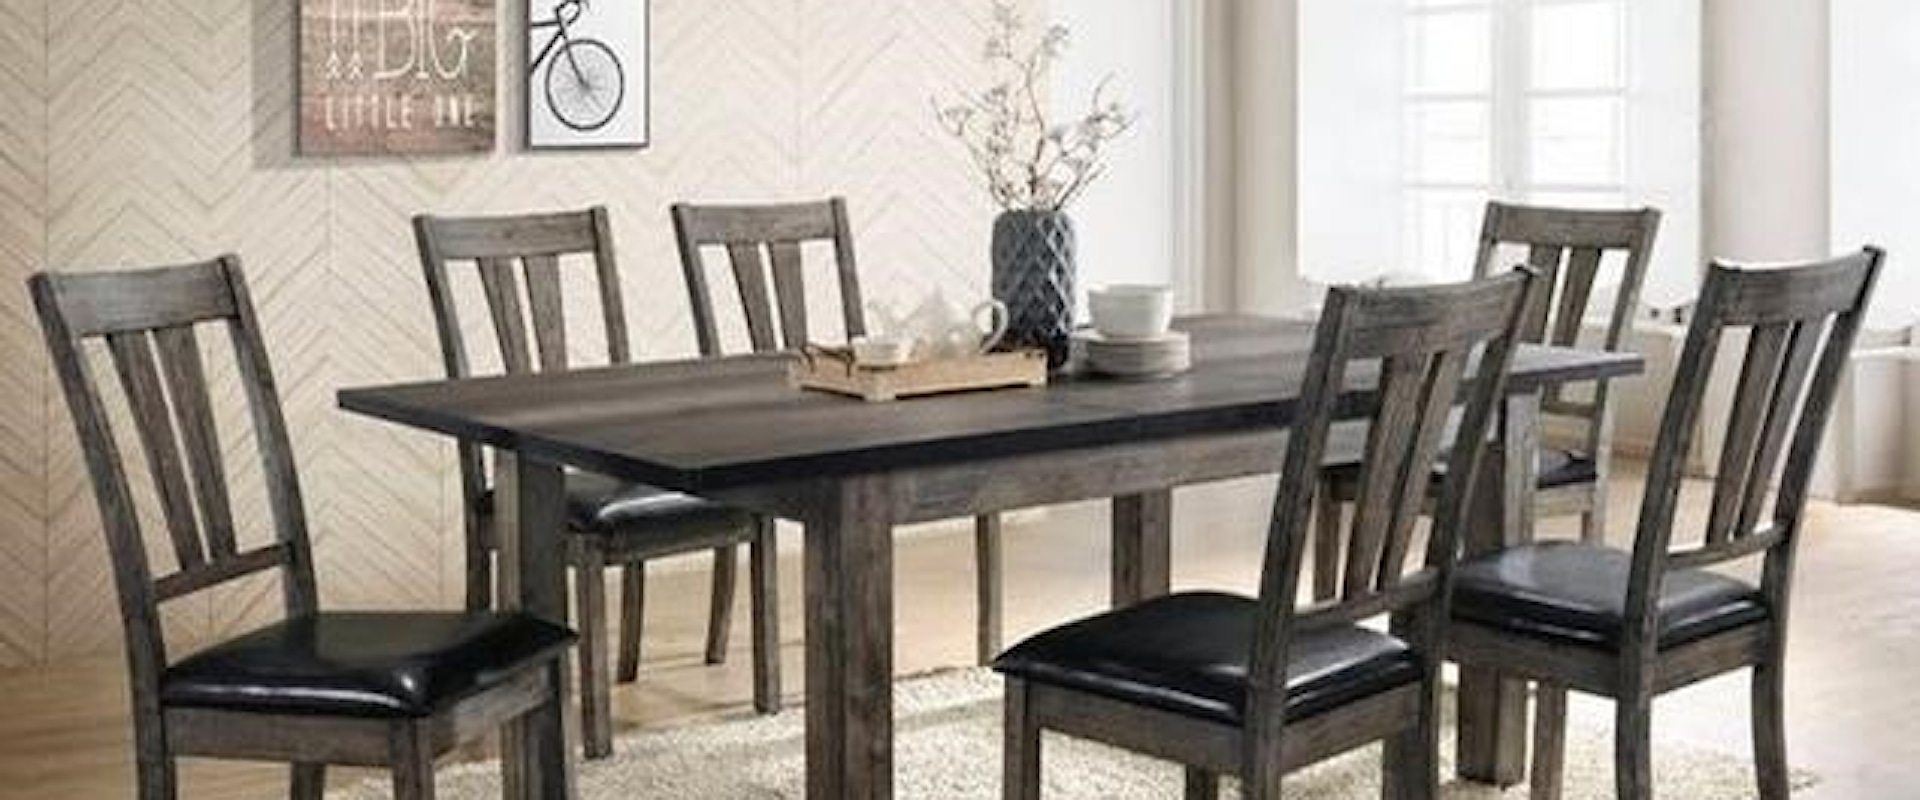 Rustic 7-Piece Dining Room Table Set